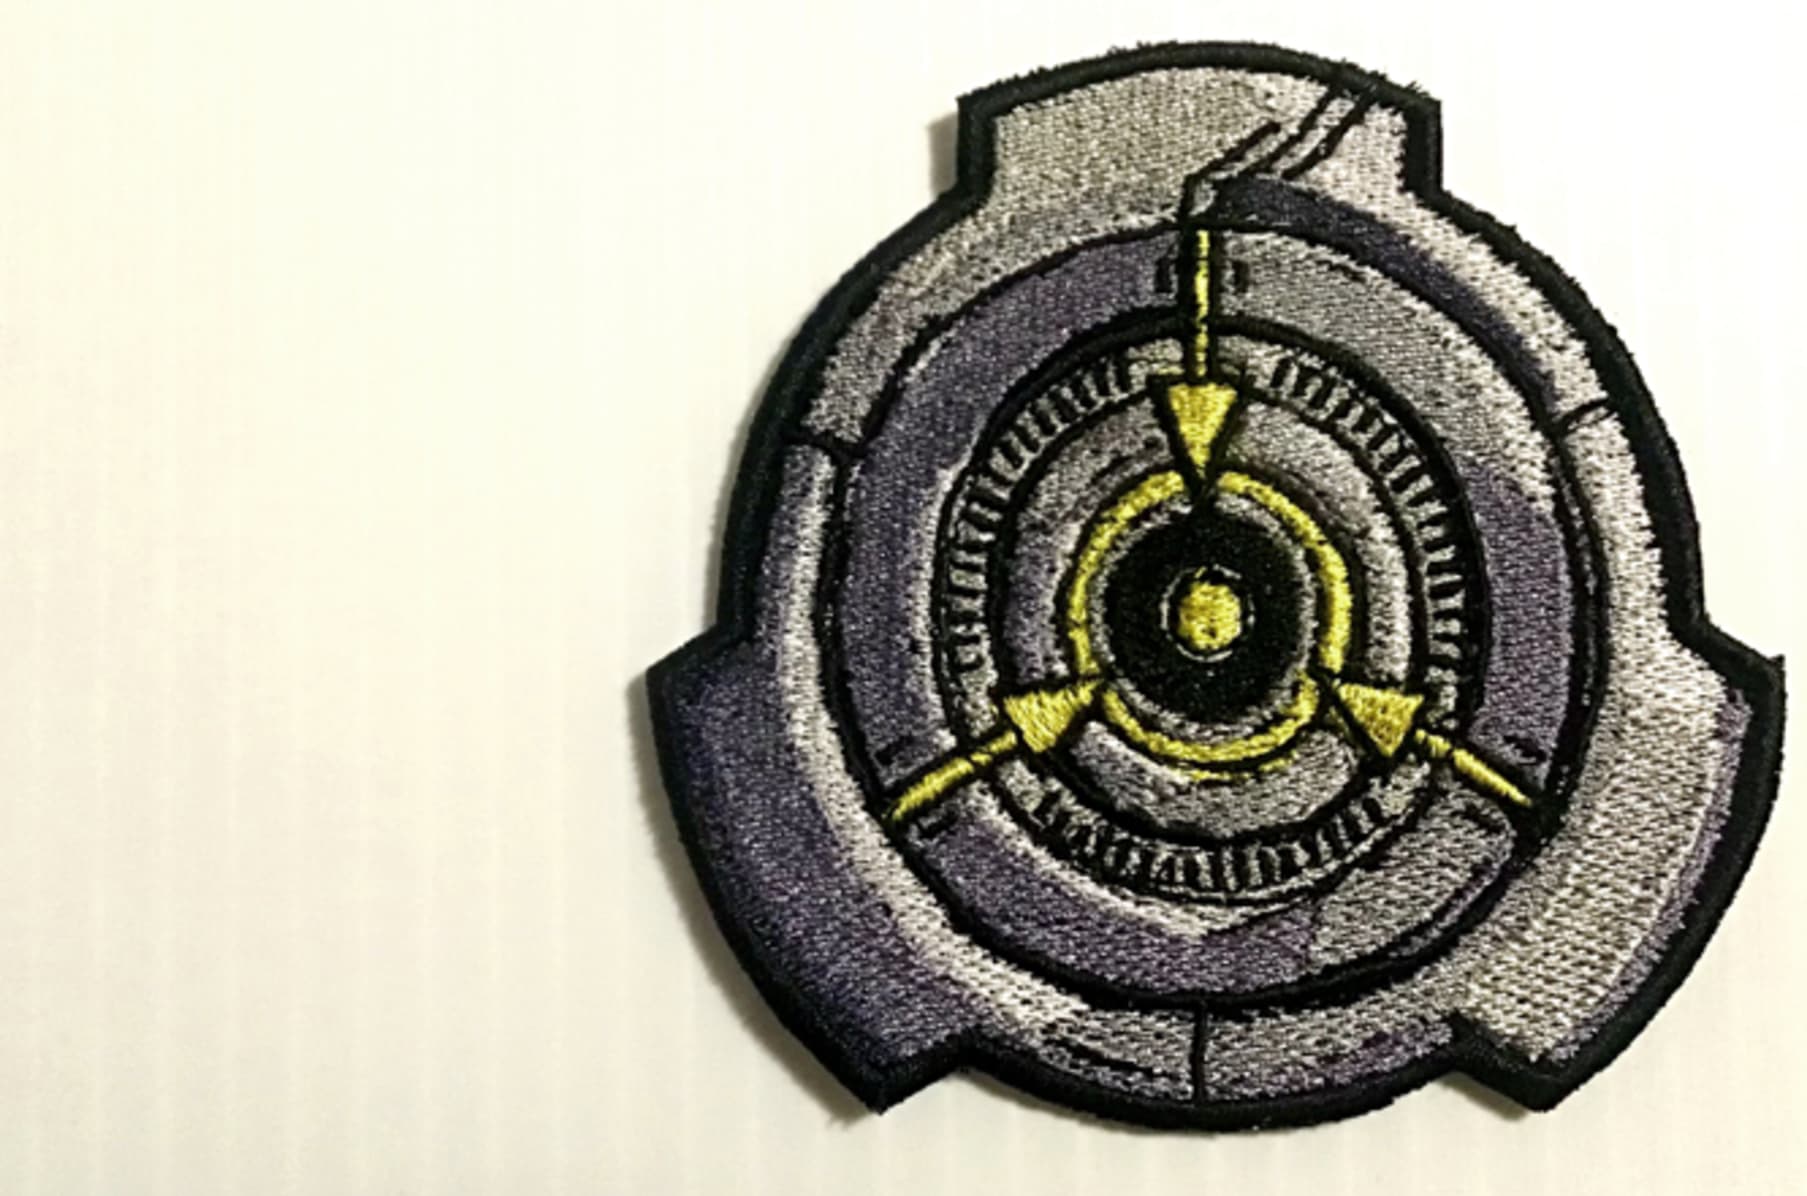 SCP FOUNDATION Super Deluxe Patches Series 01 by Gavriel